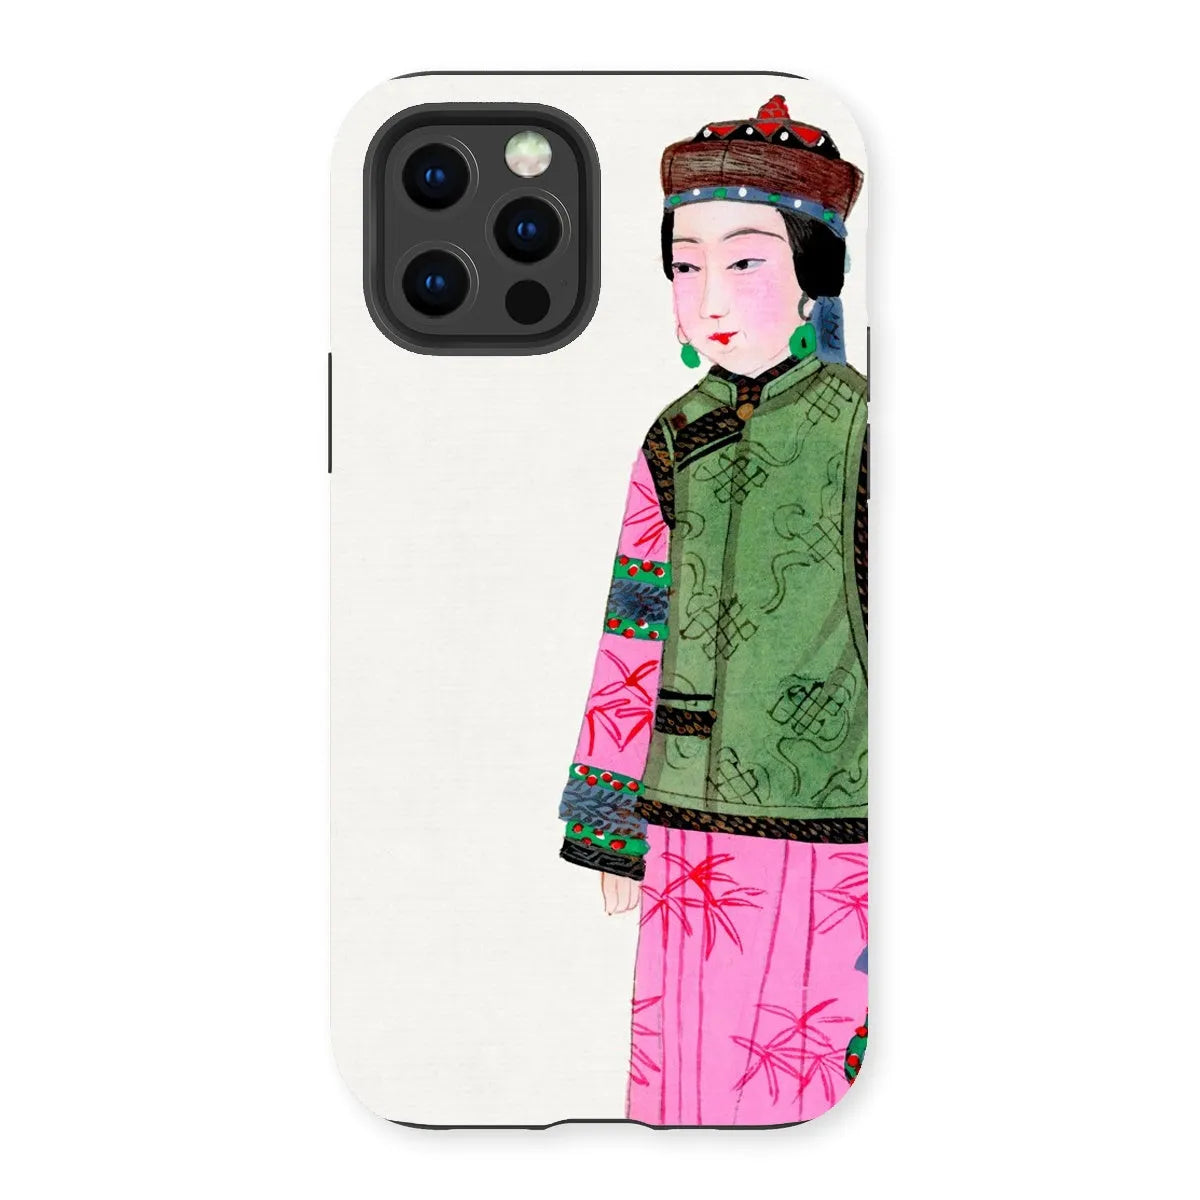 Noblewoman In Winter - Chinese Aesthetic Art Phone Case - Iphone 13 Pro / Matte - Mobile Phone Cases - Aesthetic Art